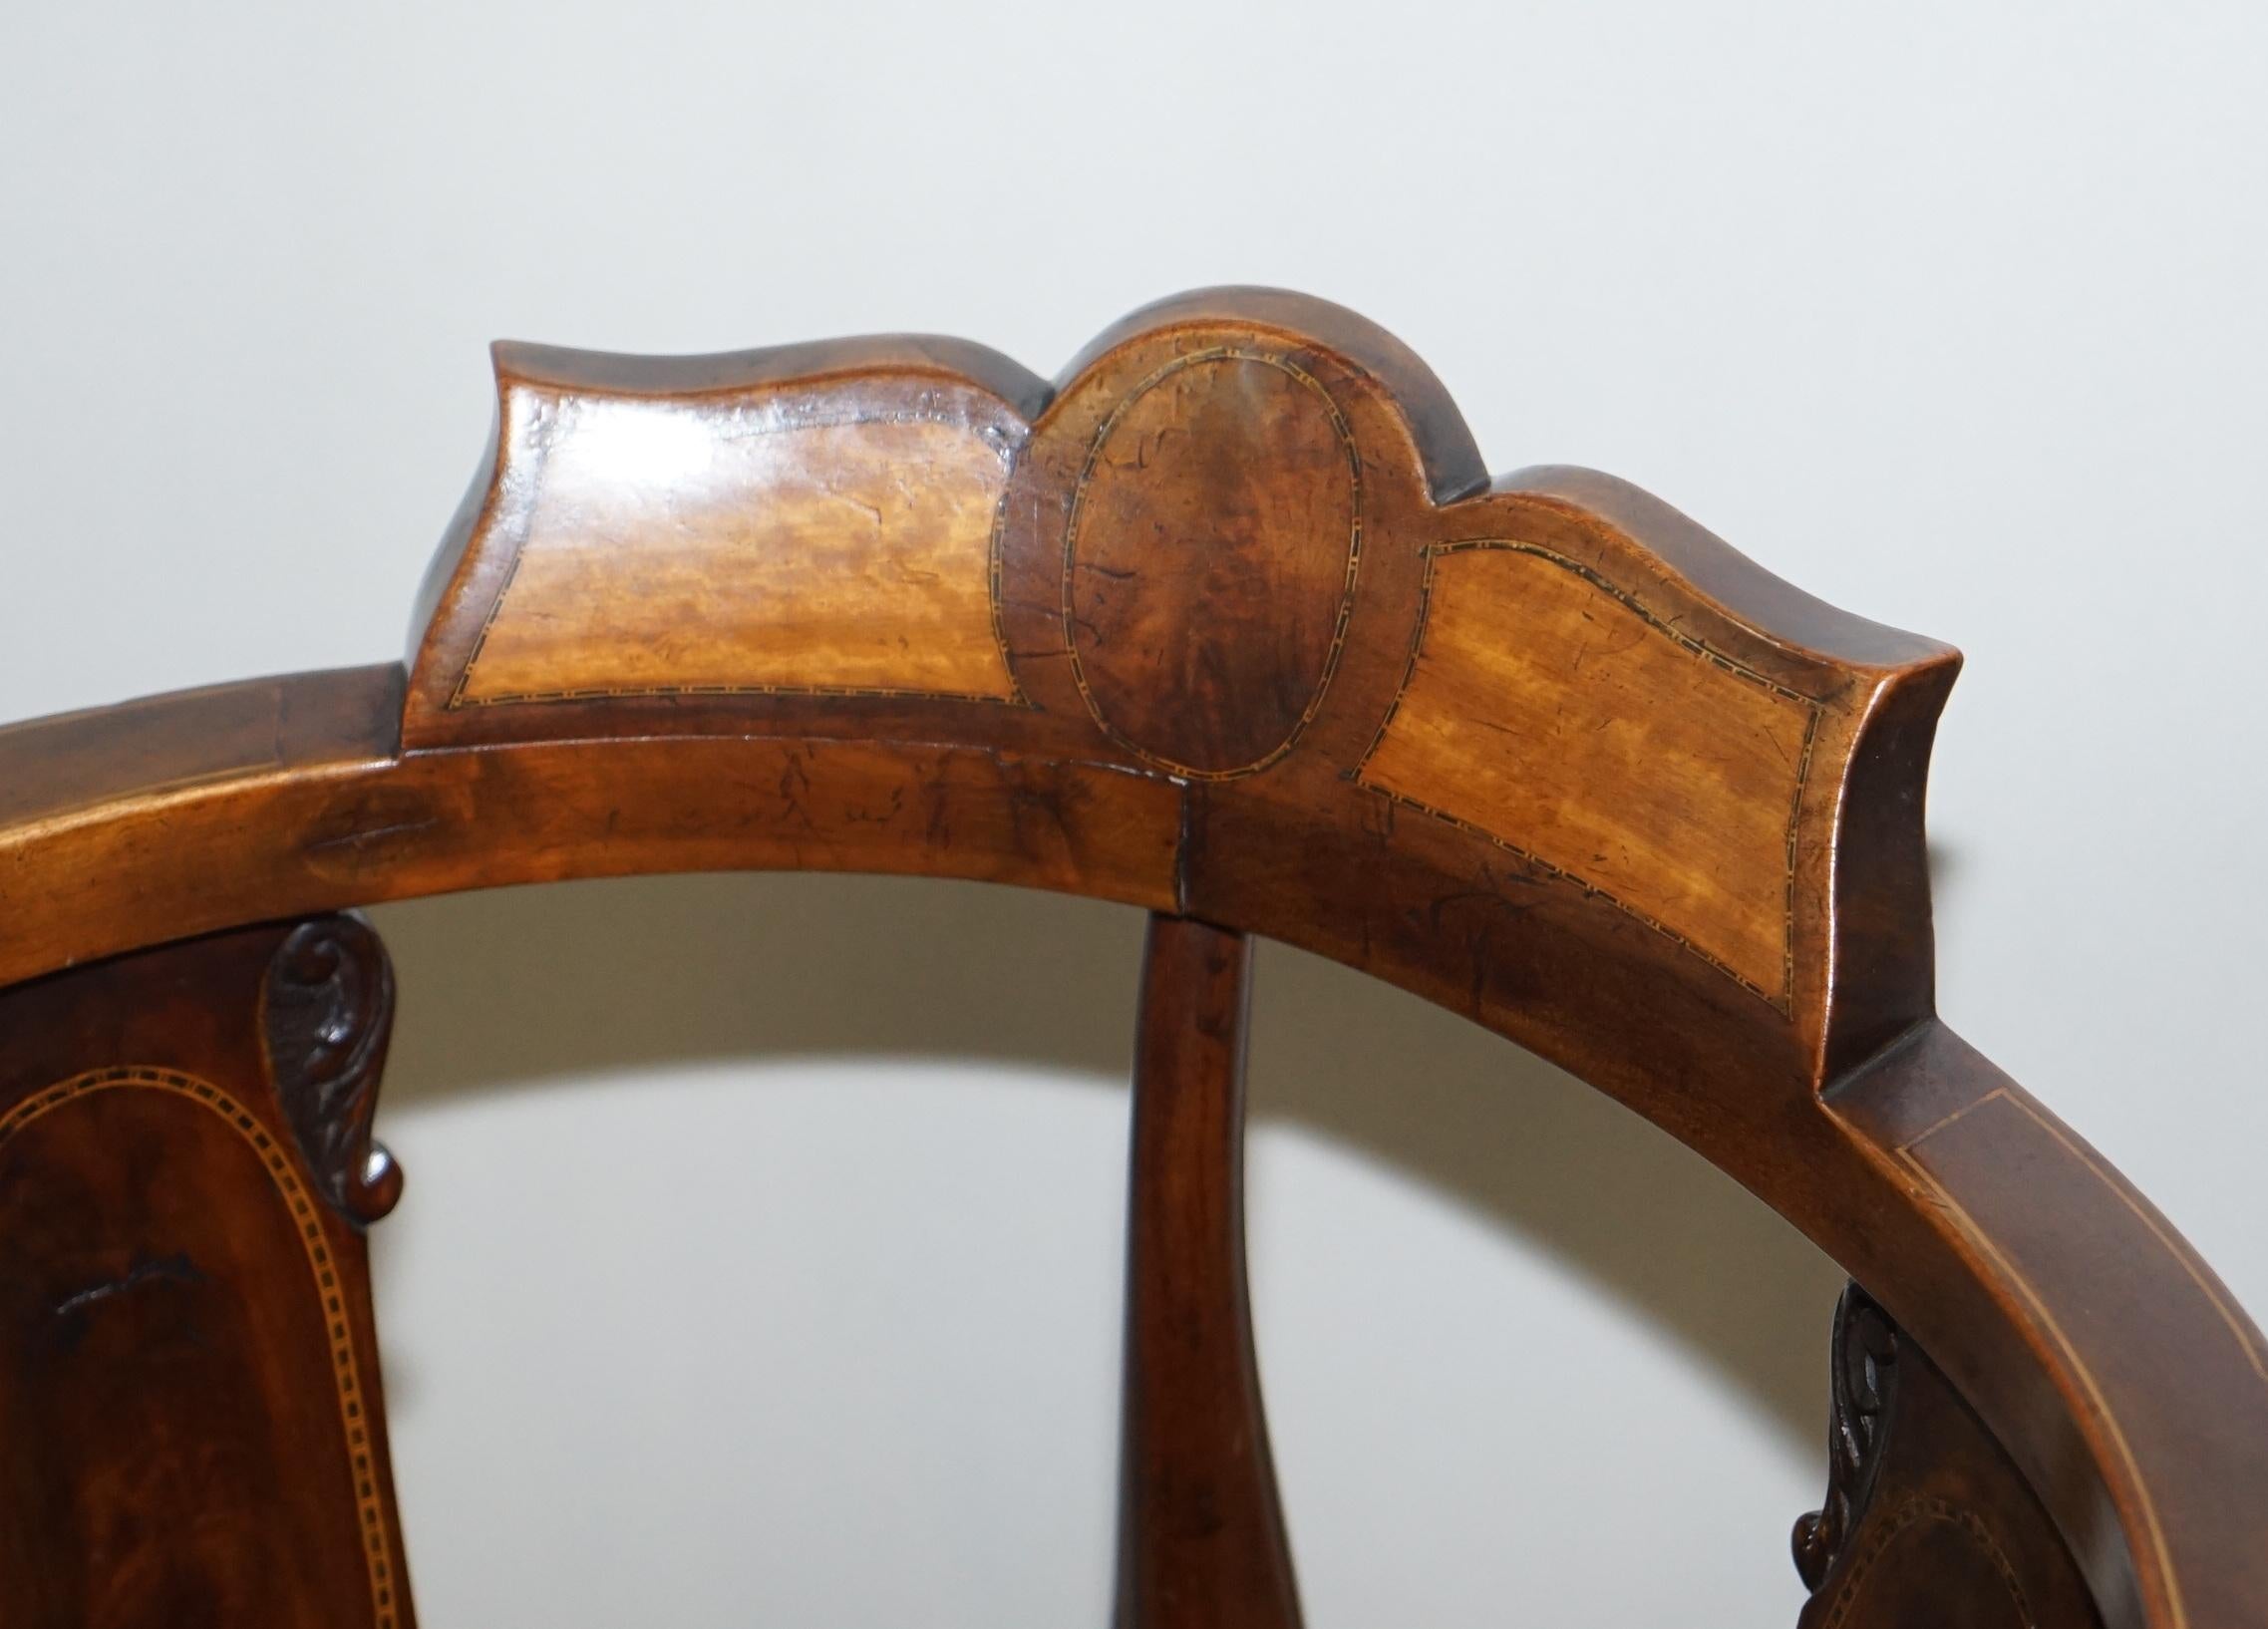 Hand-Crafted Beautifully Inlaid Sheraton Revival Victorian Corner Chair, Sublime Quality